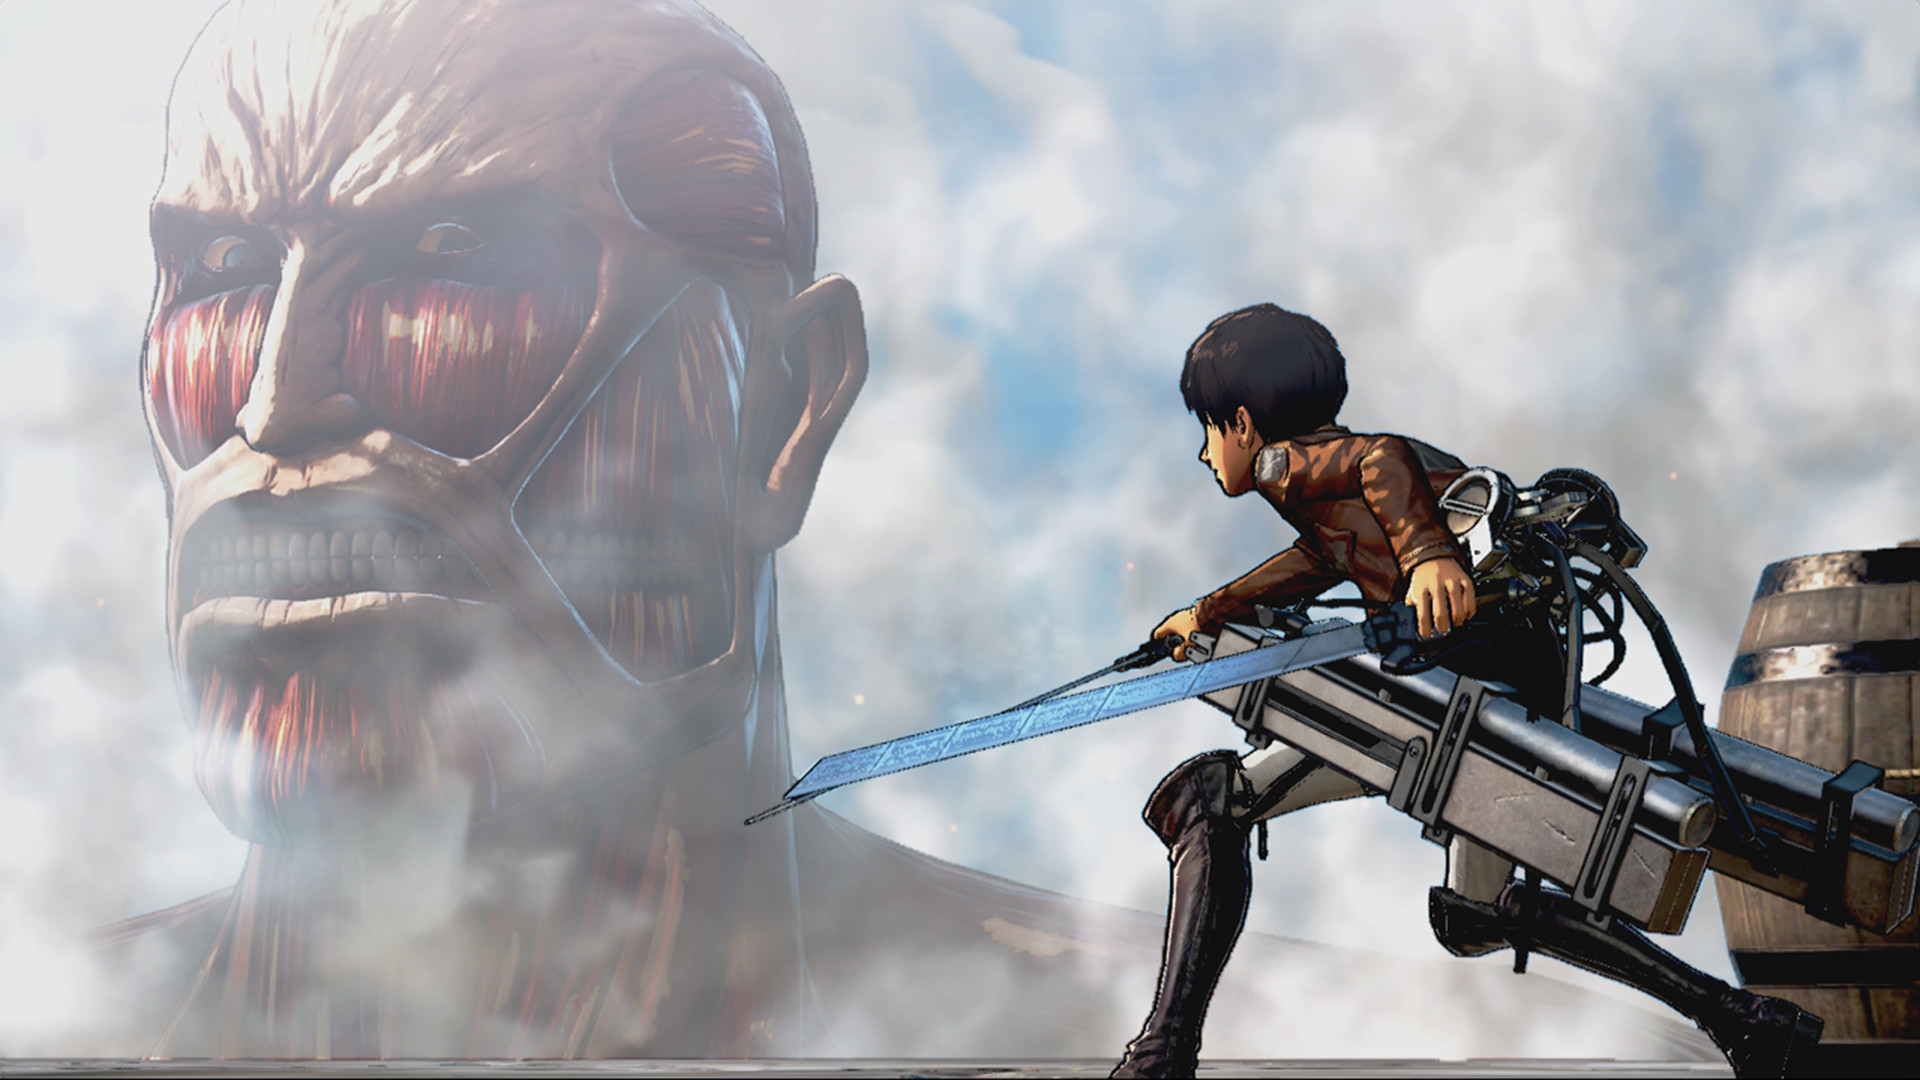 Best anime games: Attack on Titan. Image shows a titan looking at someone and looking hungry.